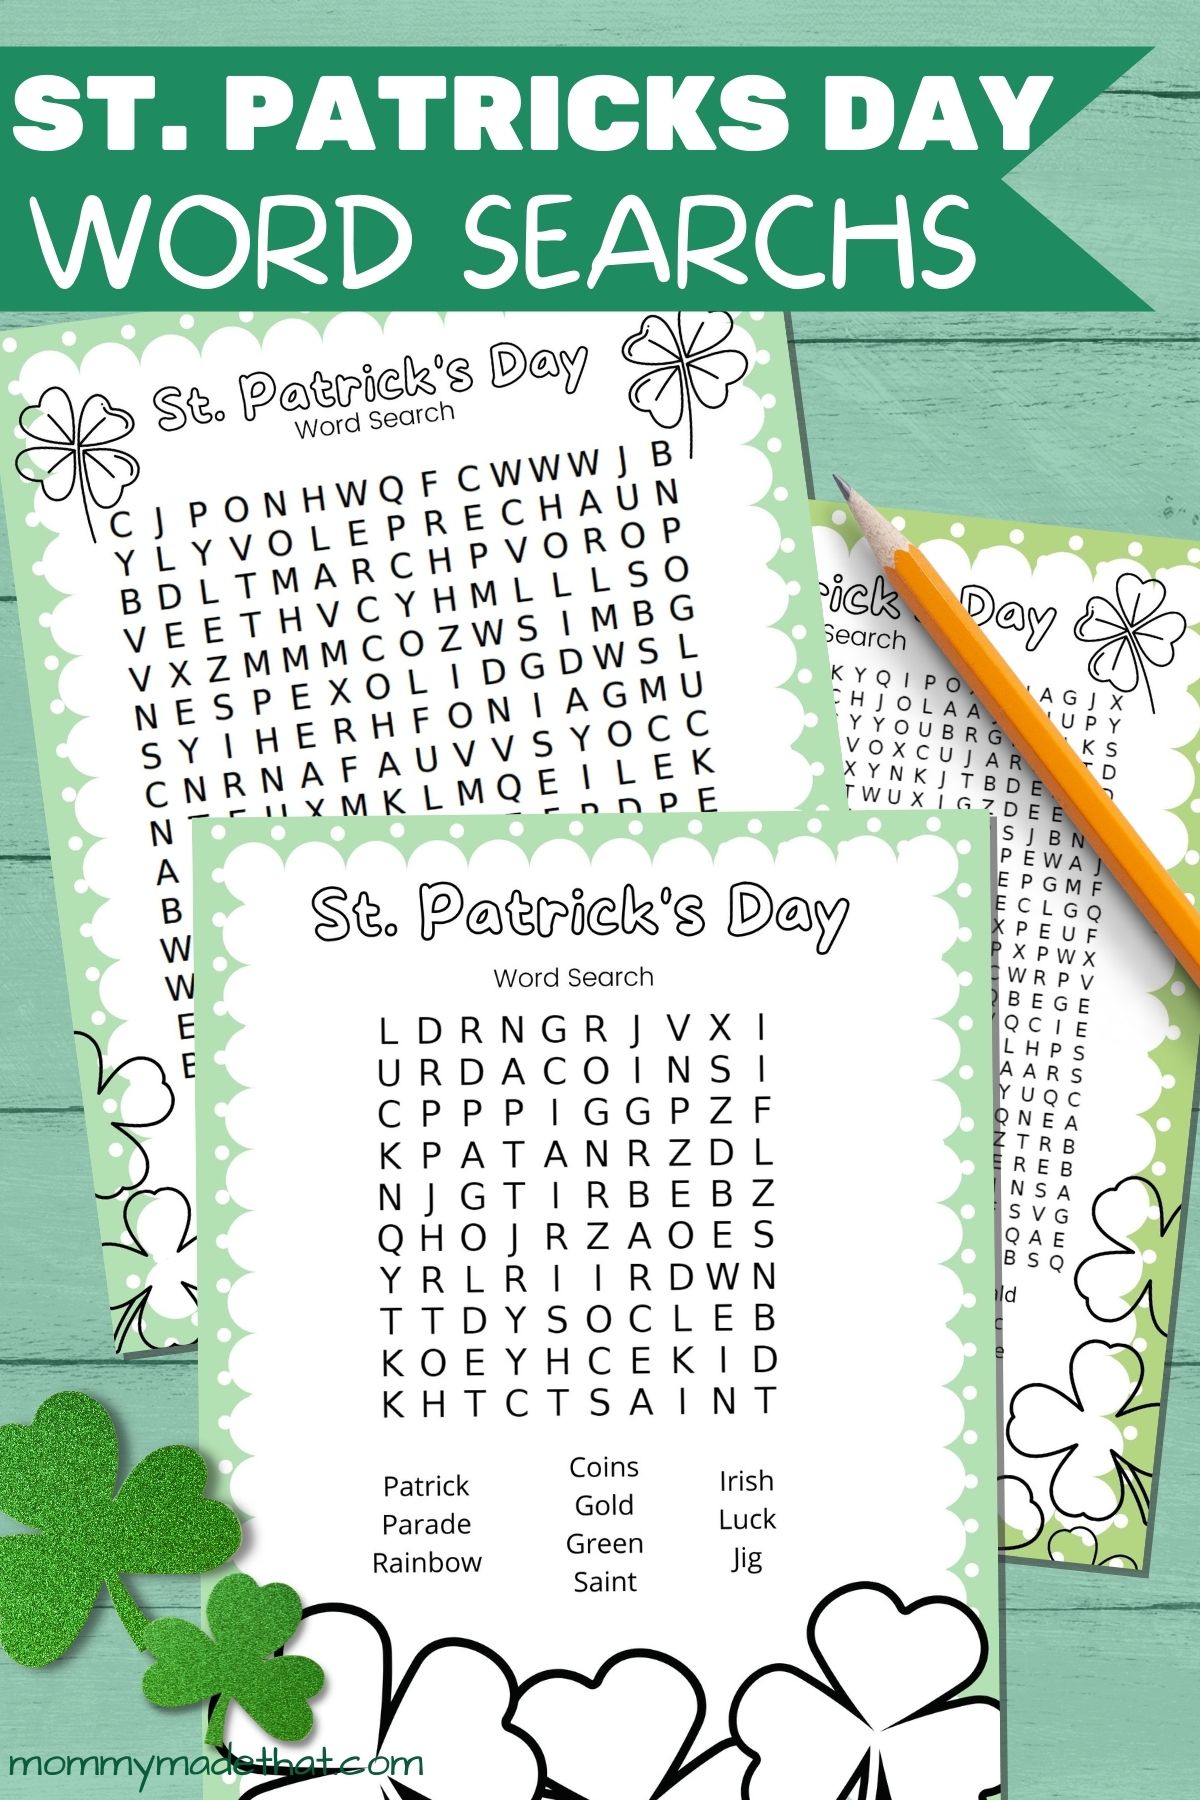 St. Patricks Day word searches